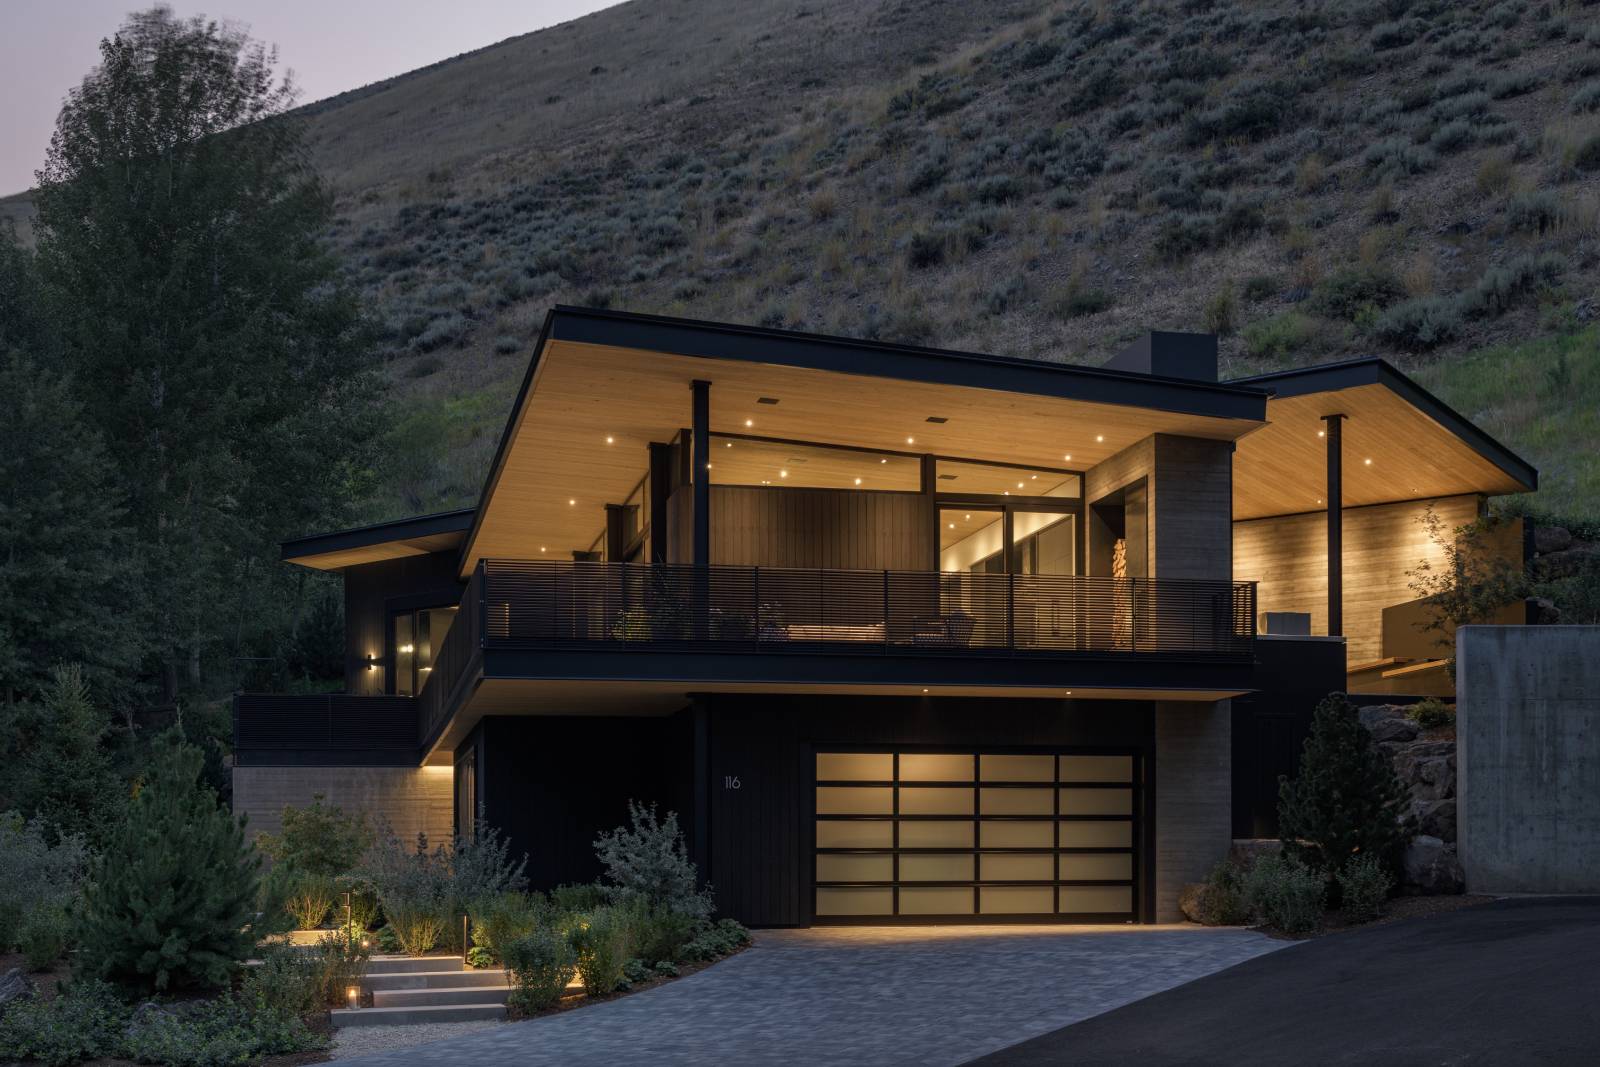 Exterior view of Avalanche Chalet at night, a custom home designed and built by Farmer Payne Architects.